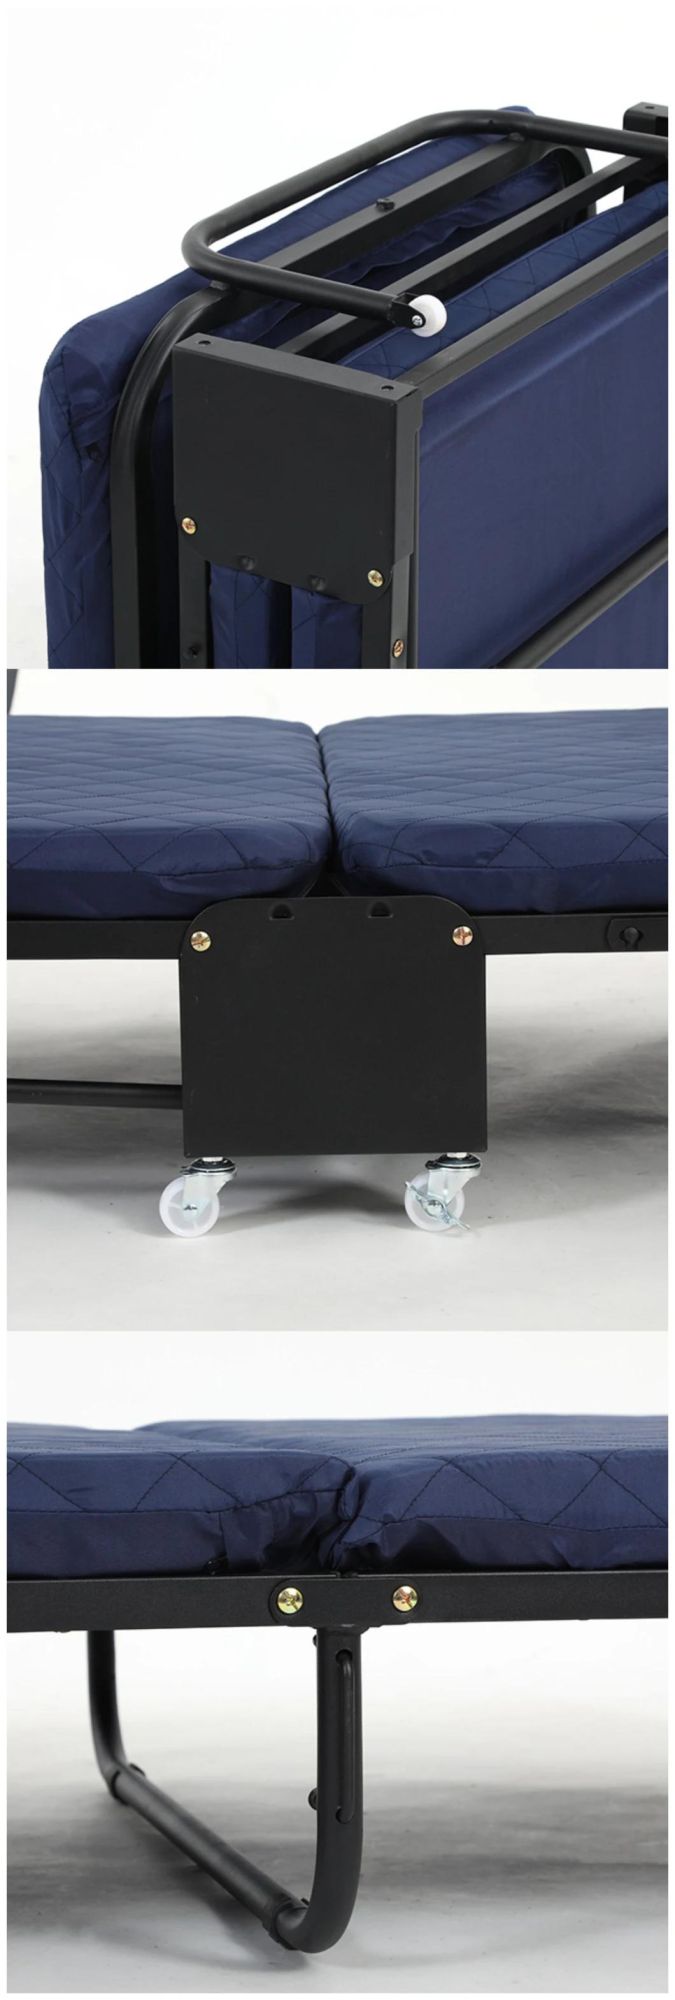 Office Furniture Hotel Folding Extra Sofa Bed for Outdoor Sleeping